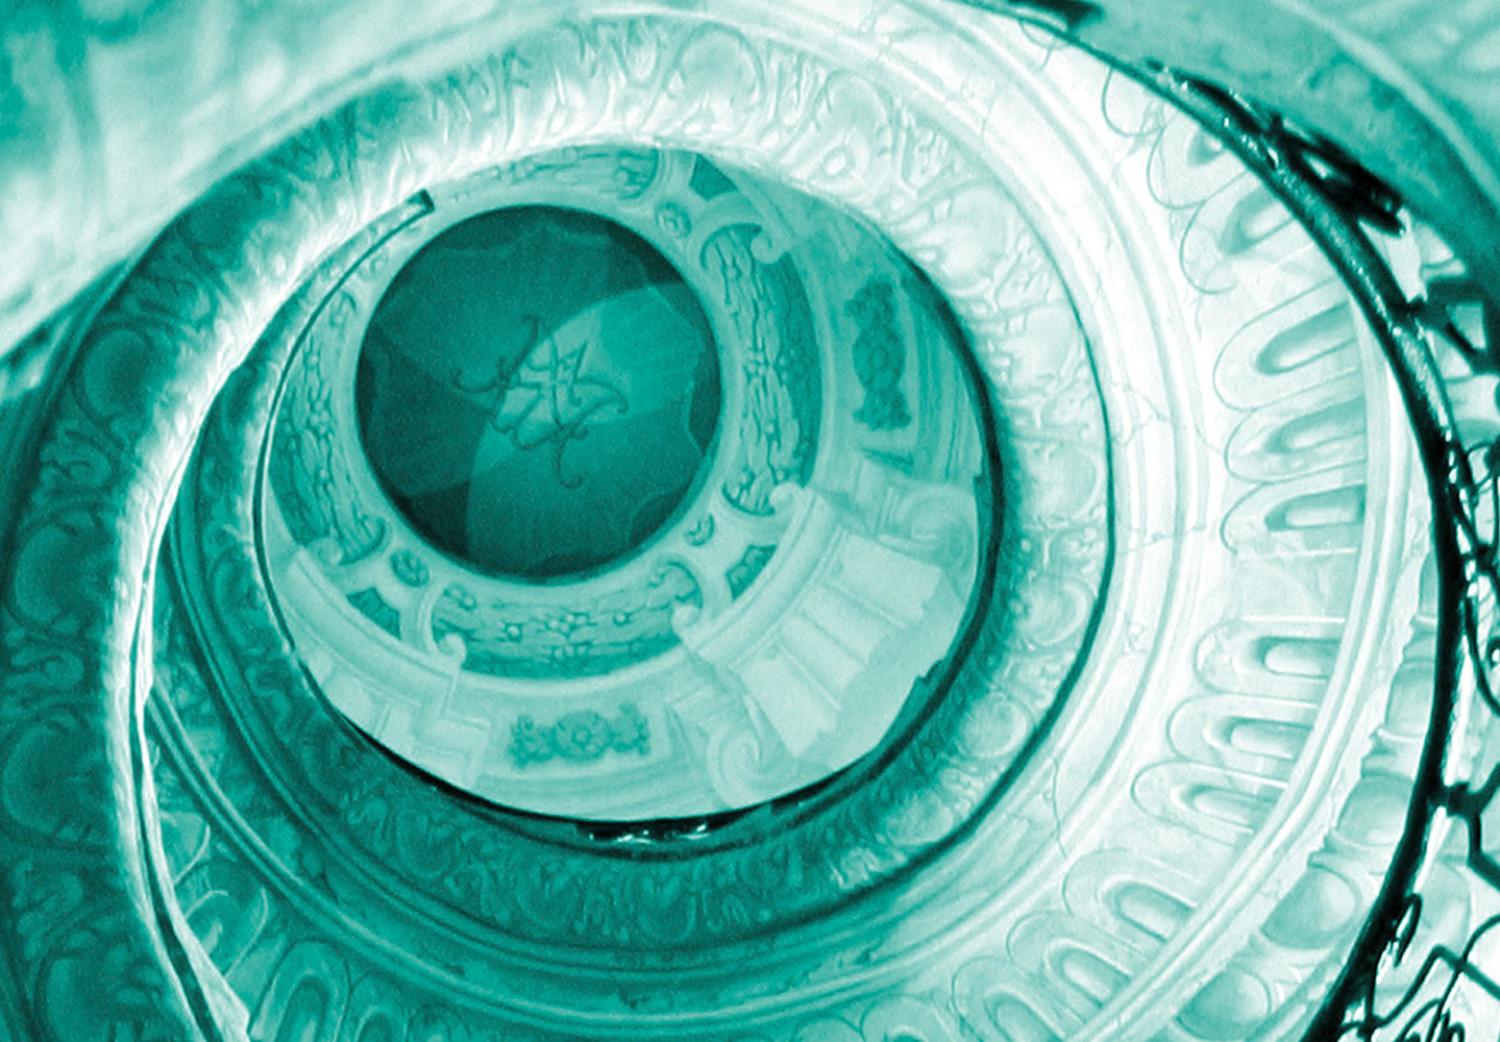 Canvas Spiral staircase - photograph of the staircase in turquoise colour